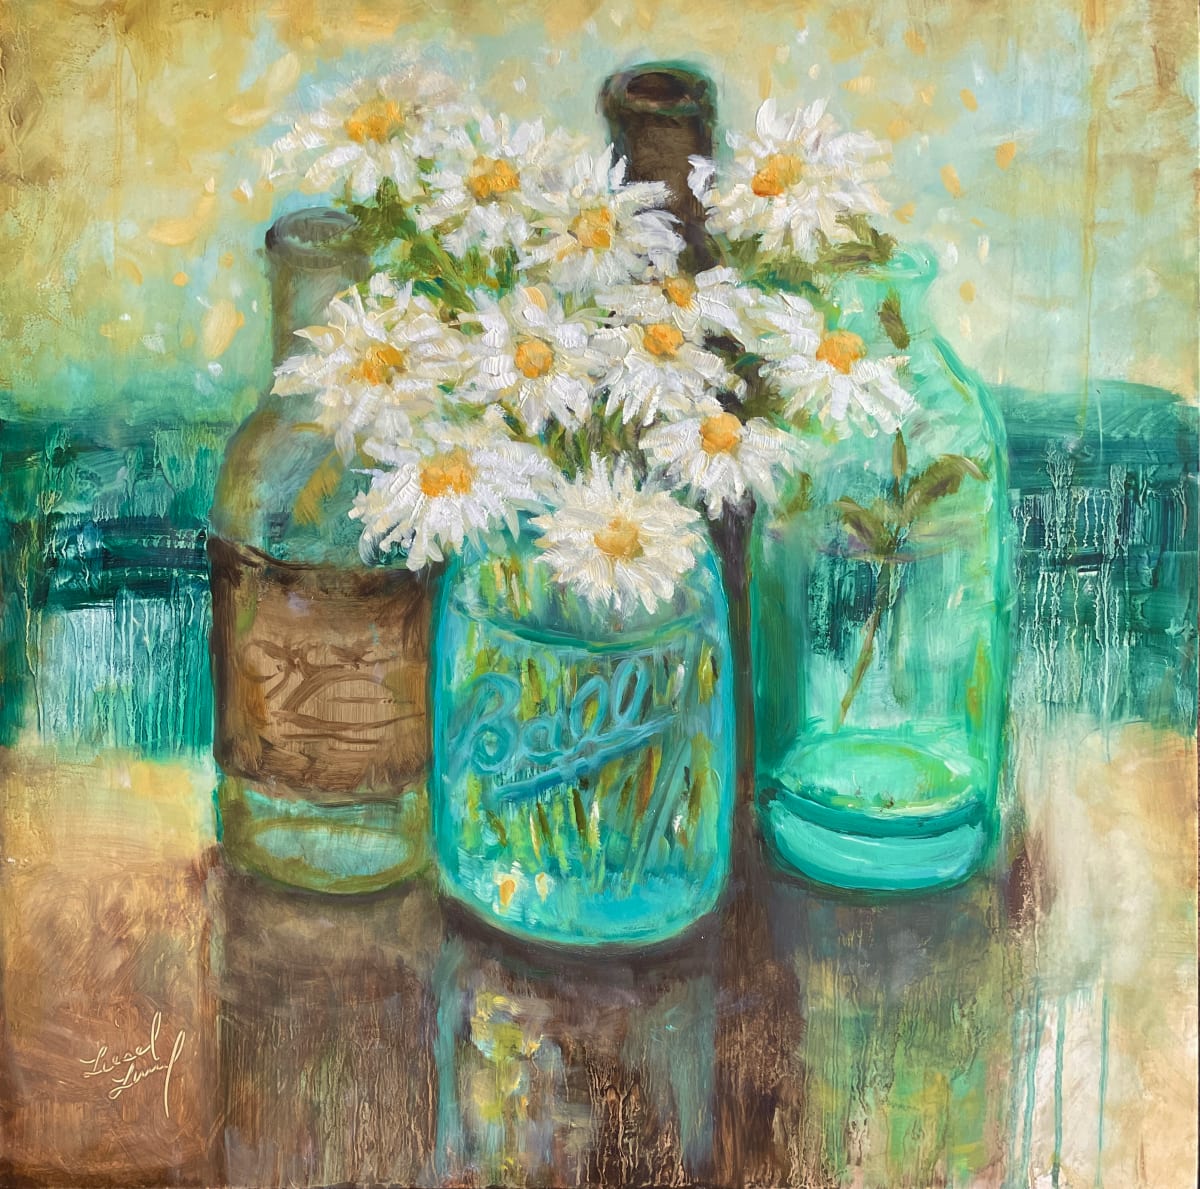 Daisies with Vintage Bottles by Liesel Lund 